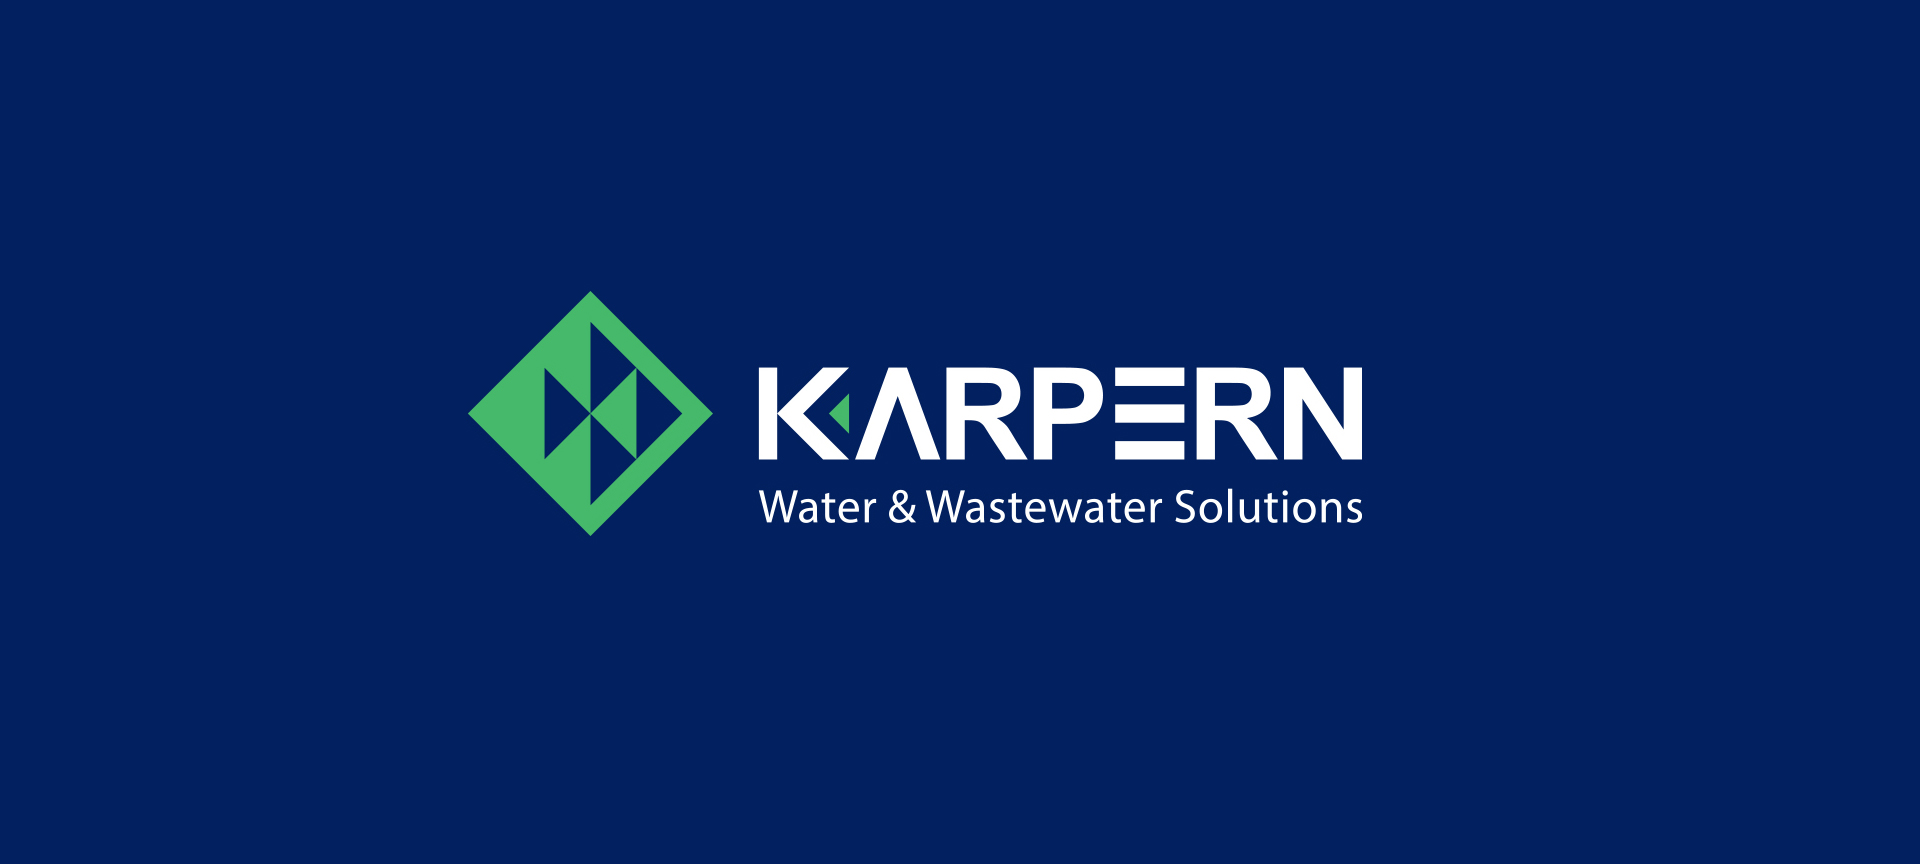 Karpern-About-water-treatment-Reuse